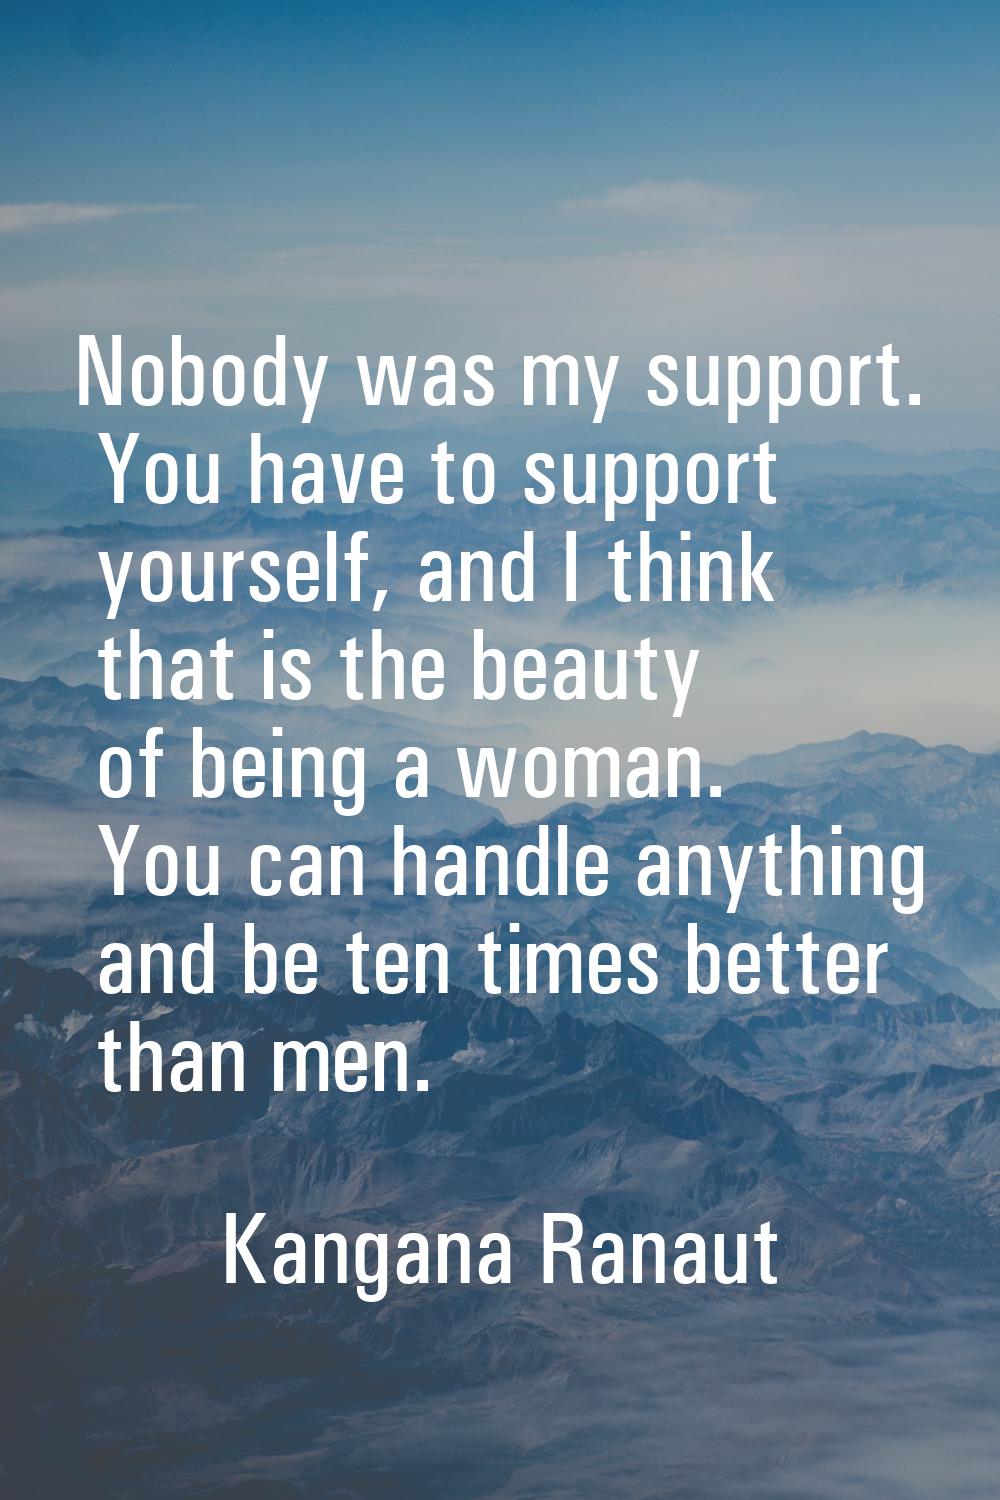 Nobody was my support. You have to support yourself, and I think that is the beauty of being a woma